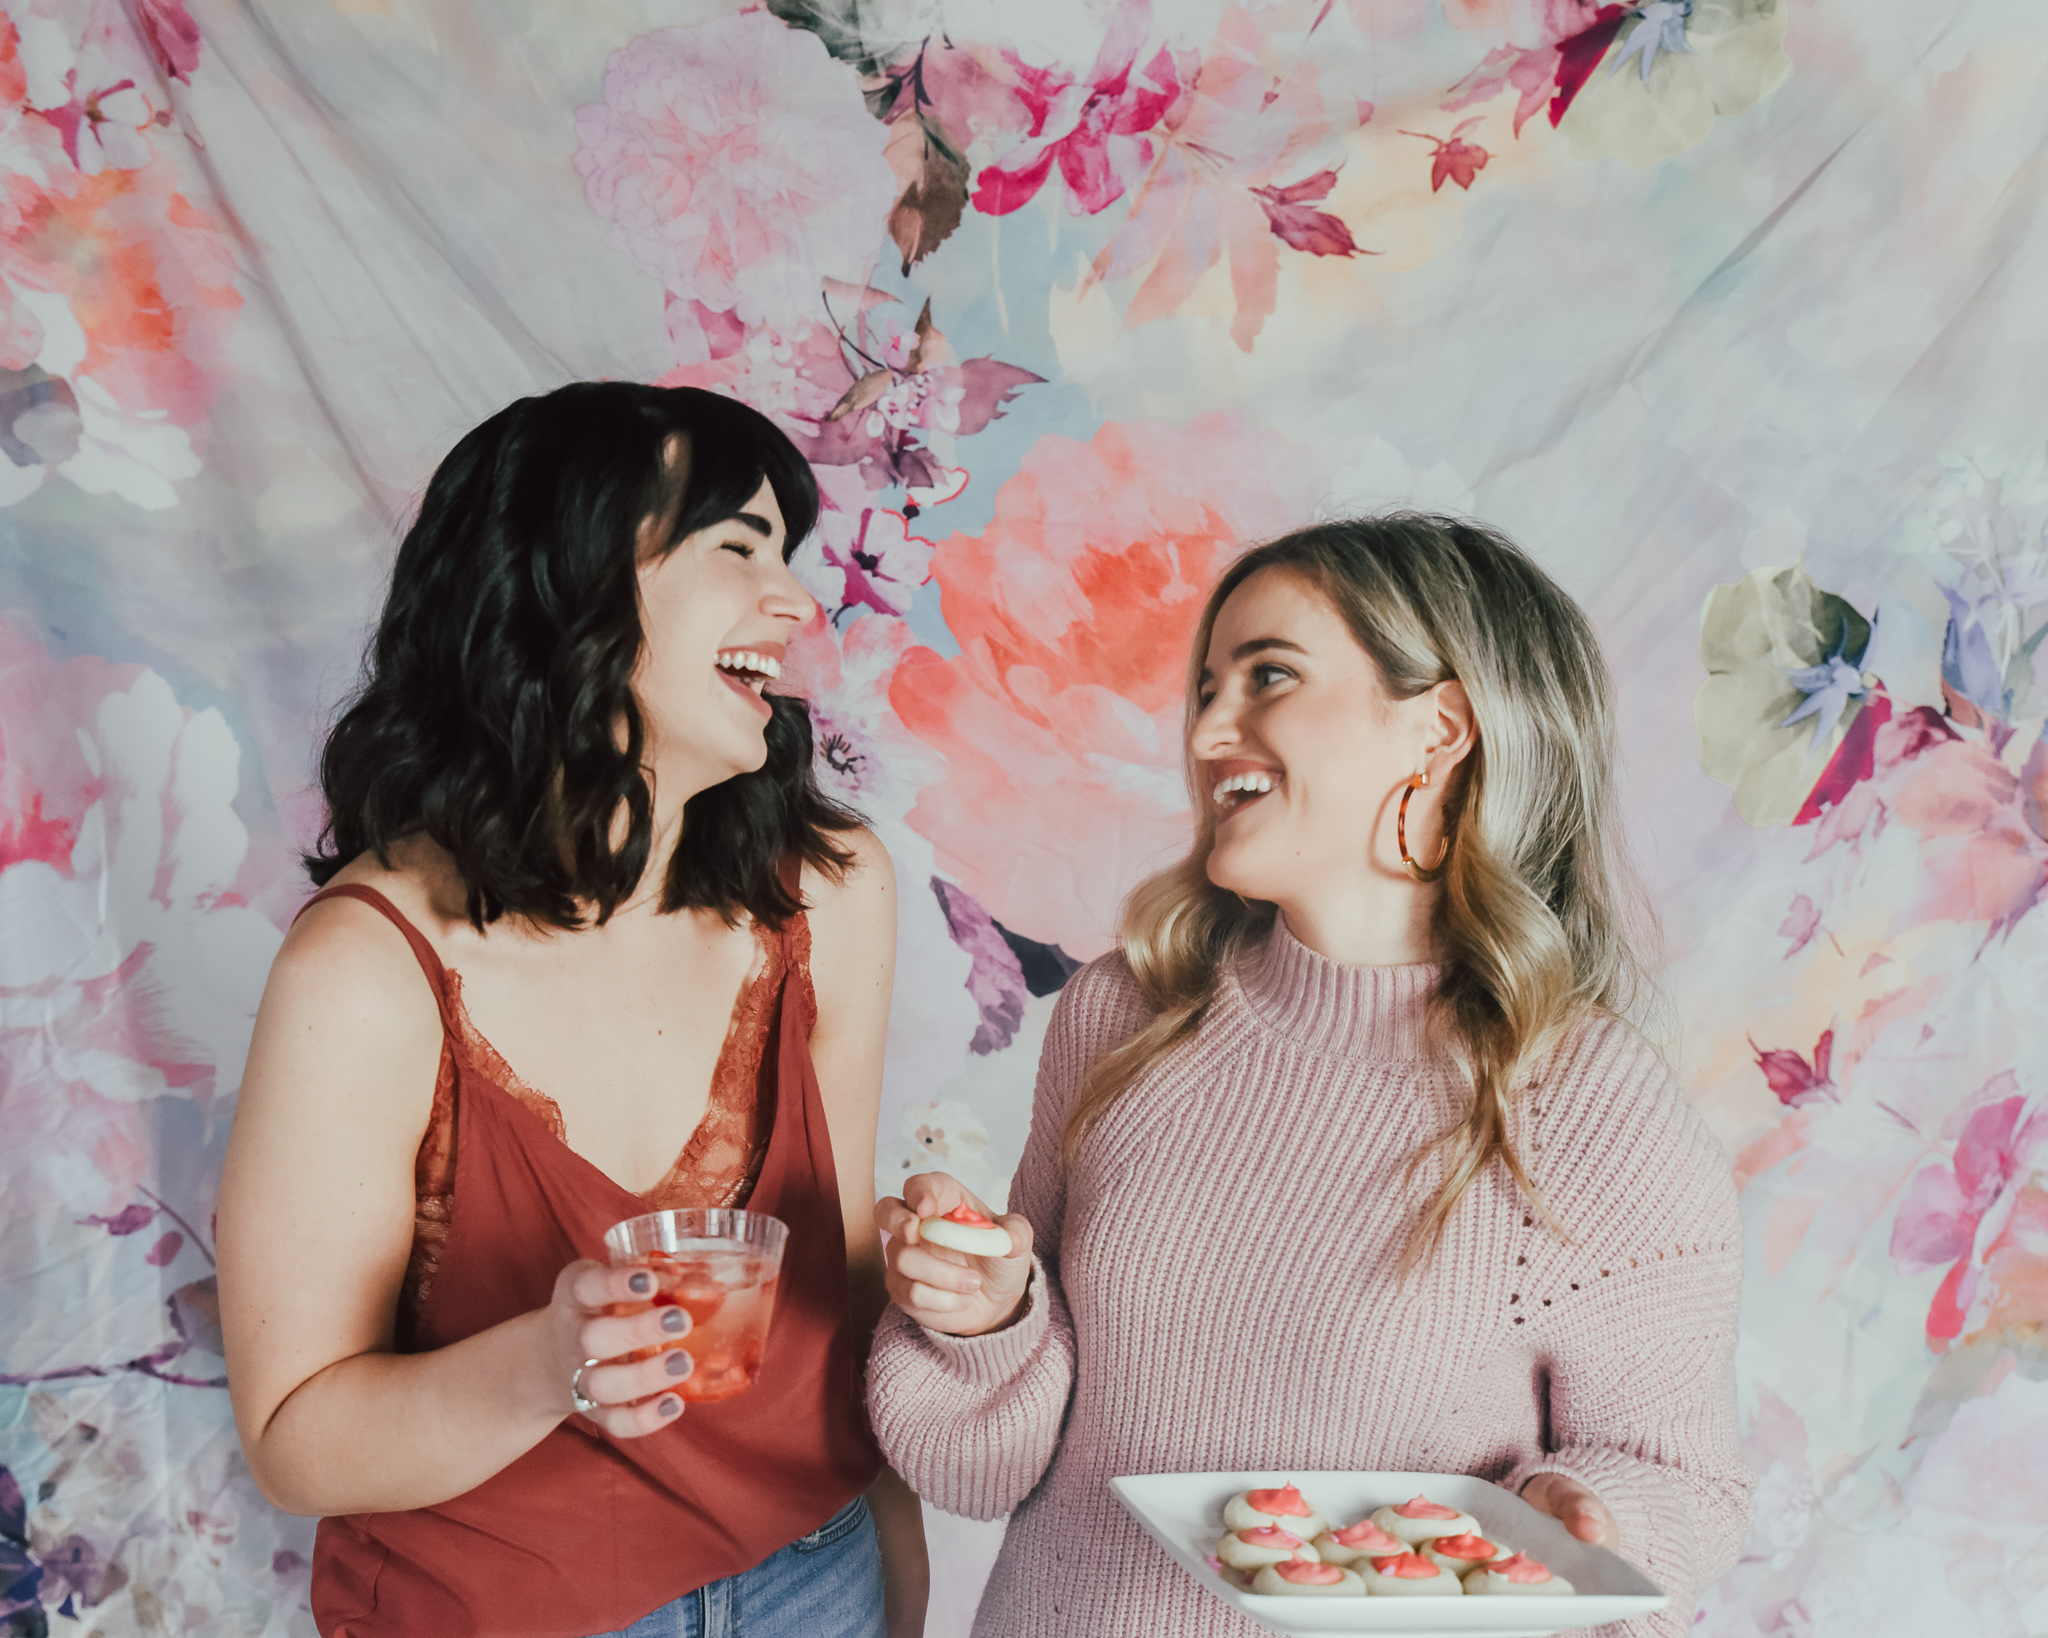 5-IDEAS-FOR-HOSTING-THE-ULTIMATE-GALENTINE'S-DAY-PARTY-1.jpg